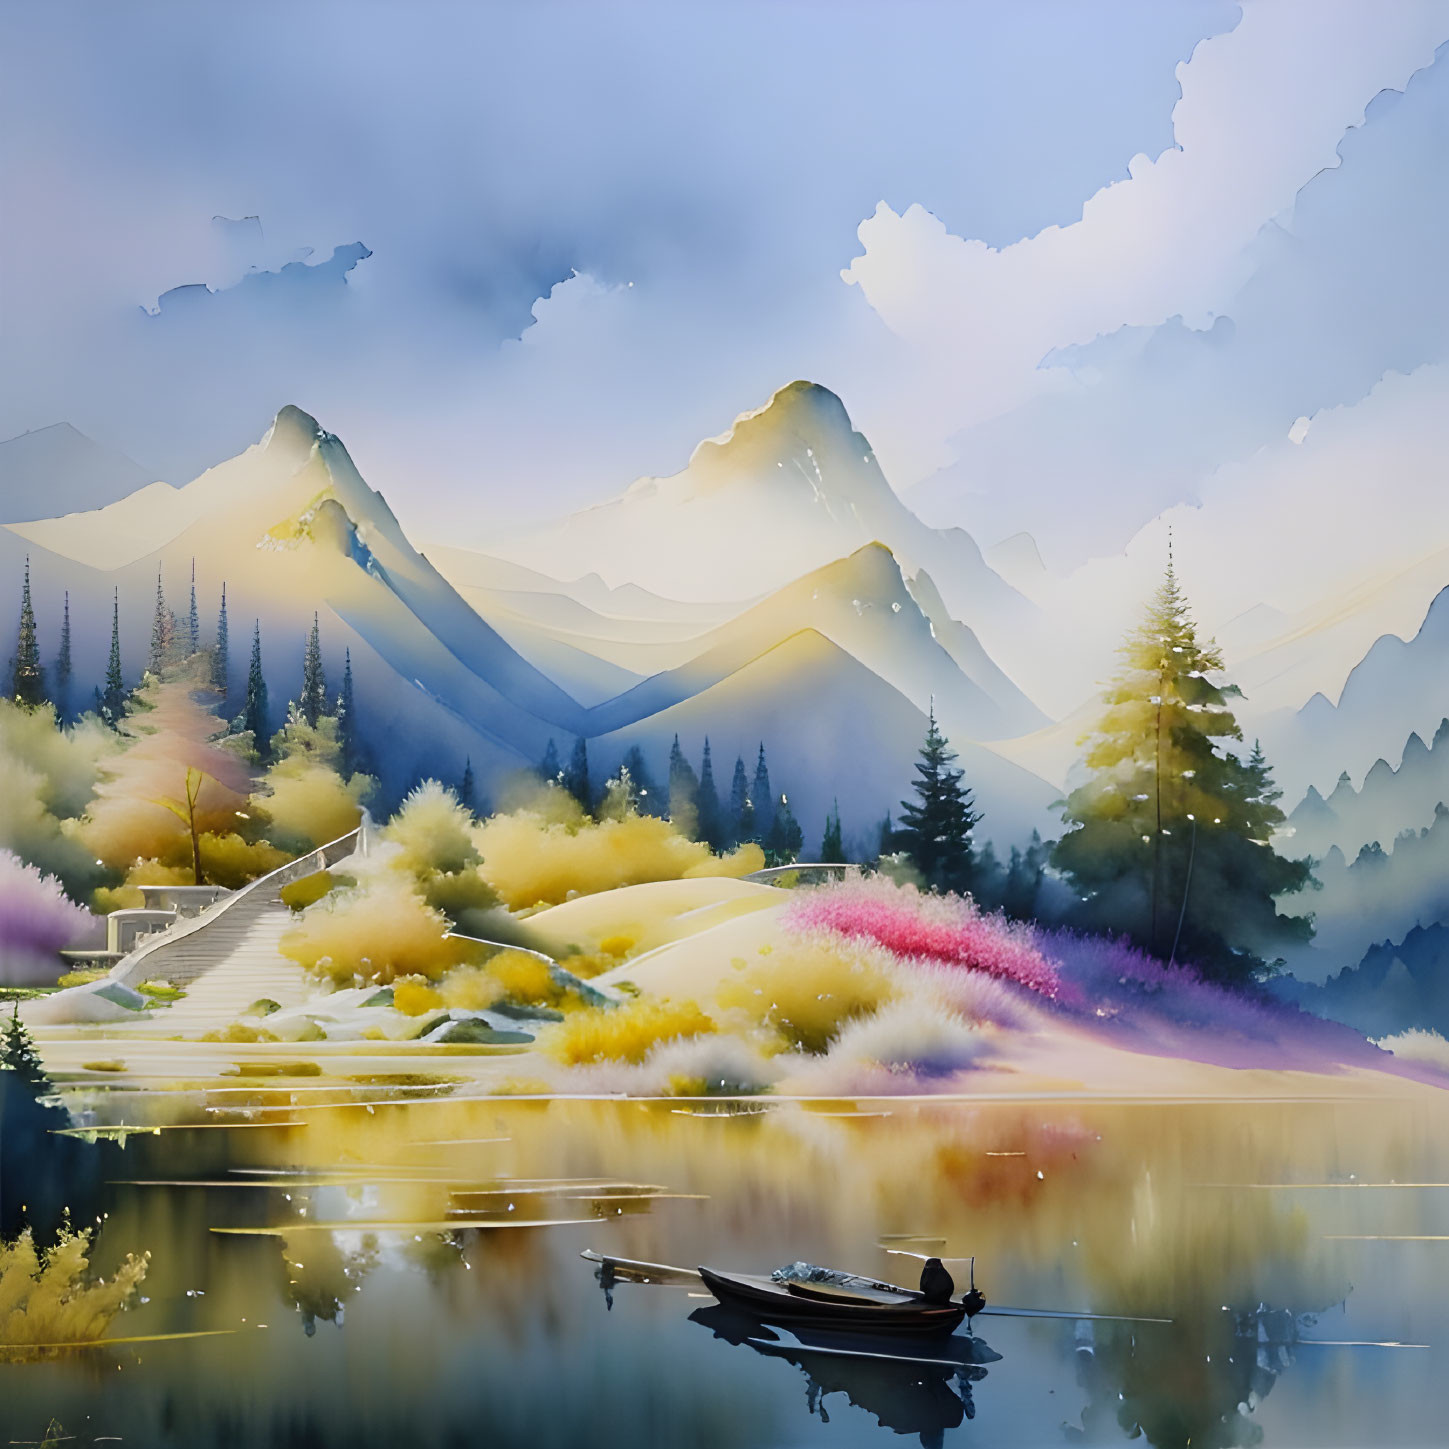 Tranquil landscape painting: serene mountains, calm lake, boat, colorful flora